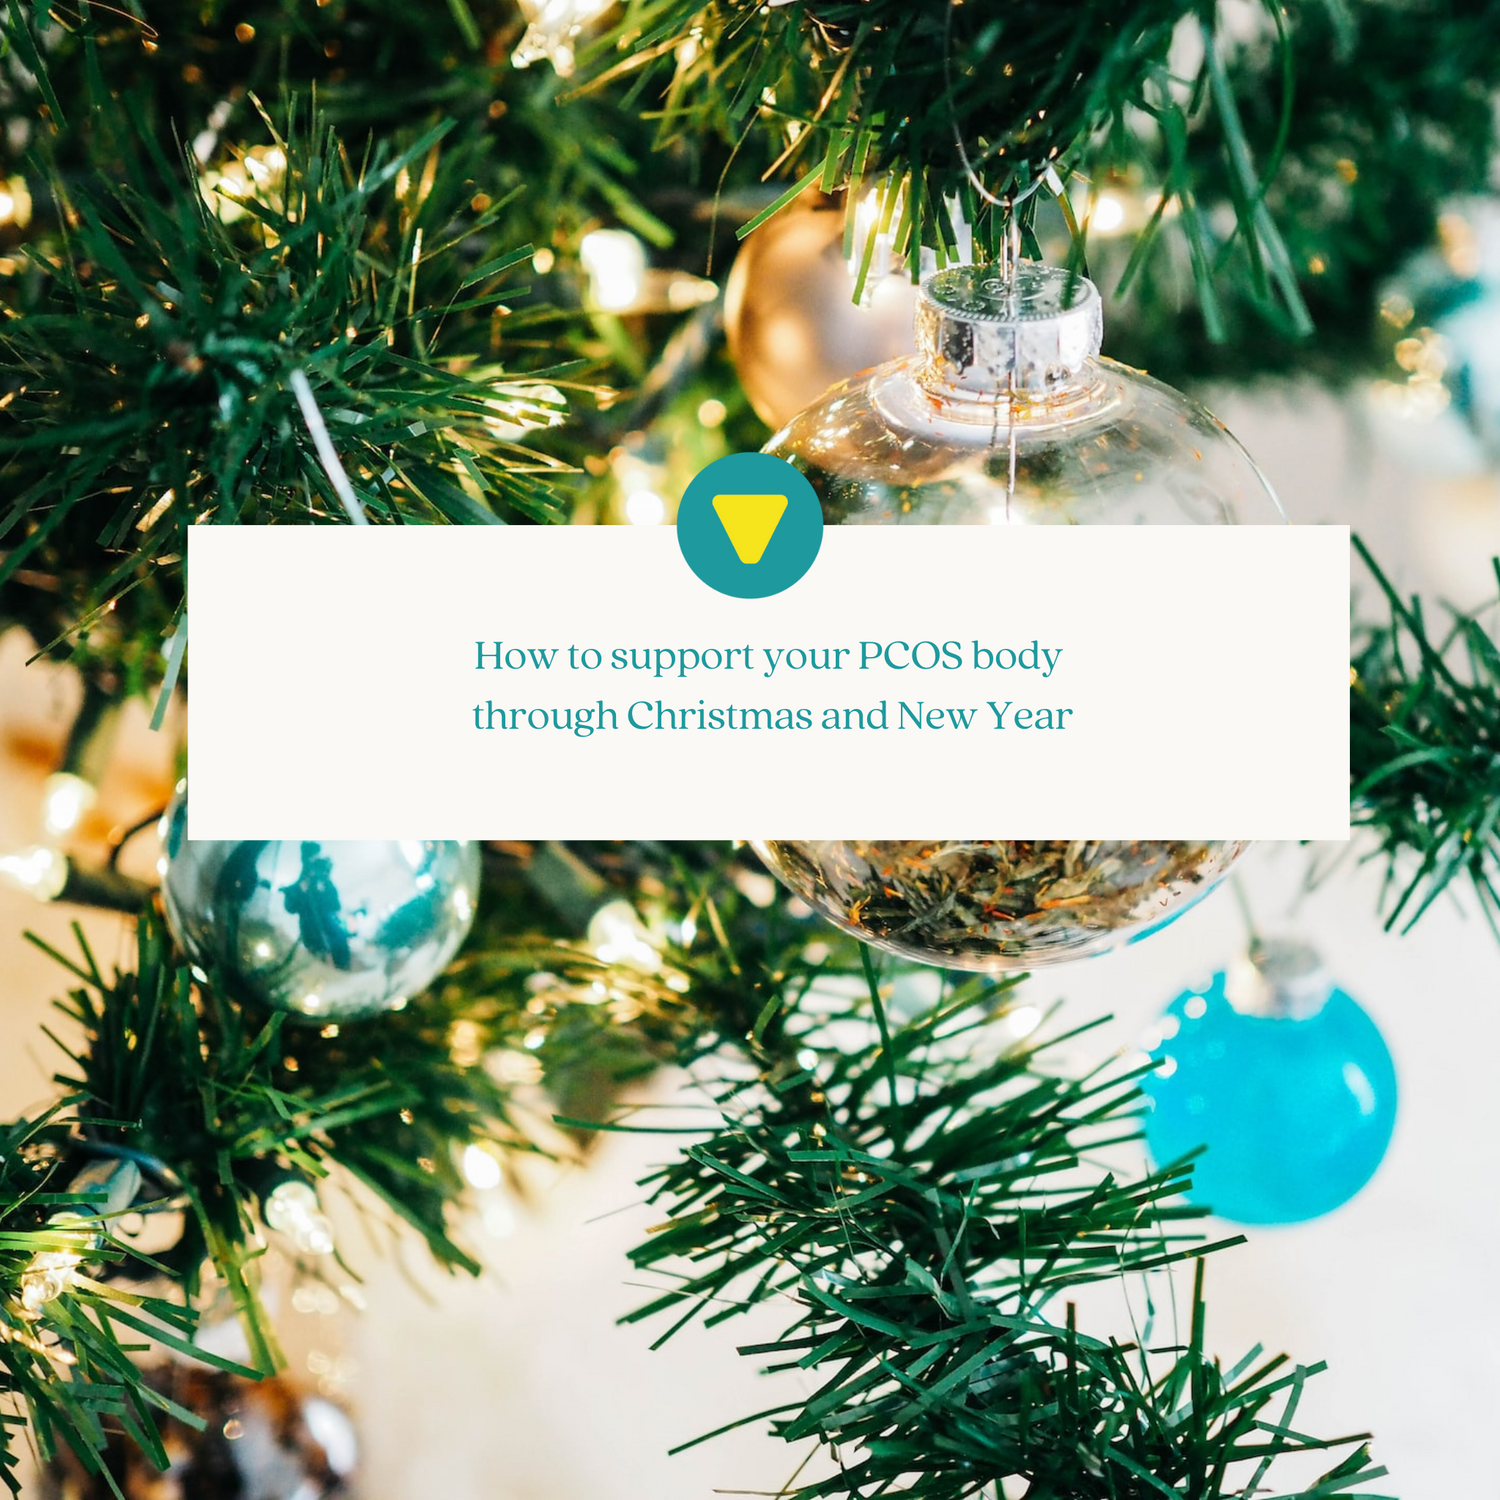 How to support your PCOS body through Christmas and New Year